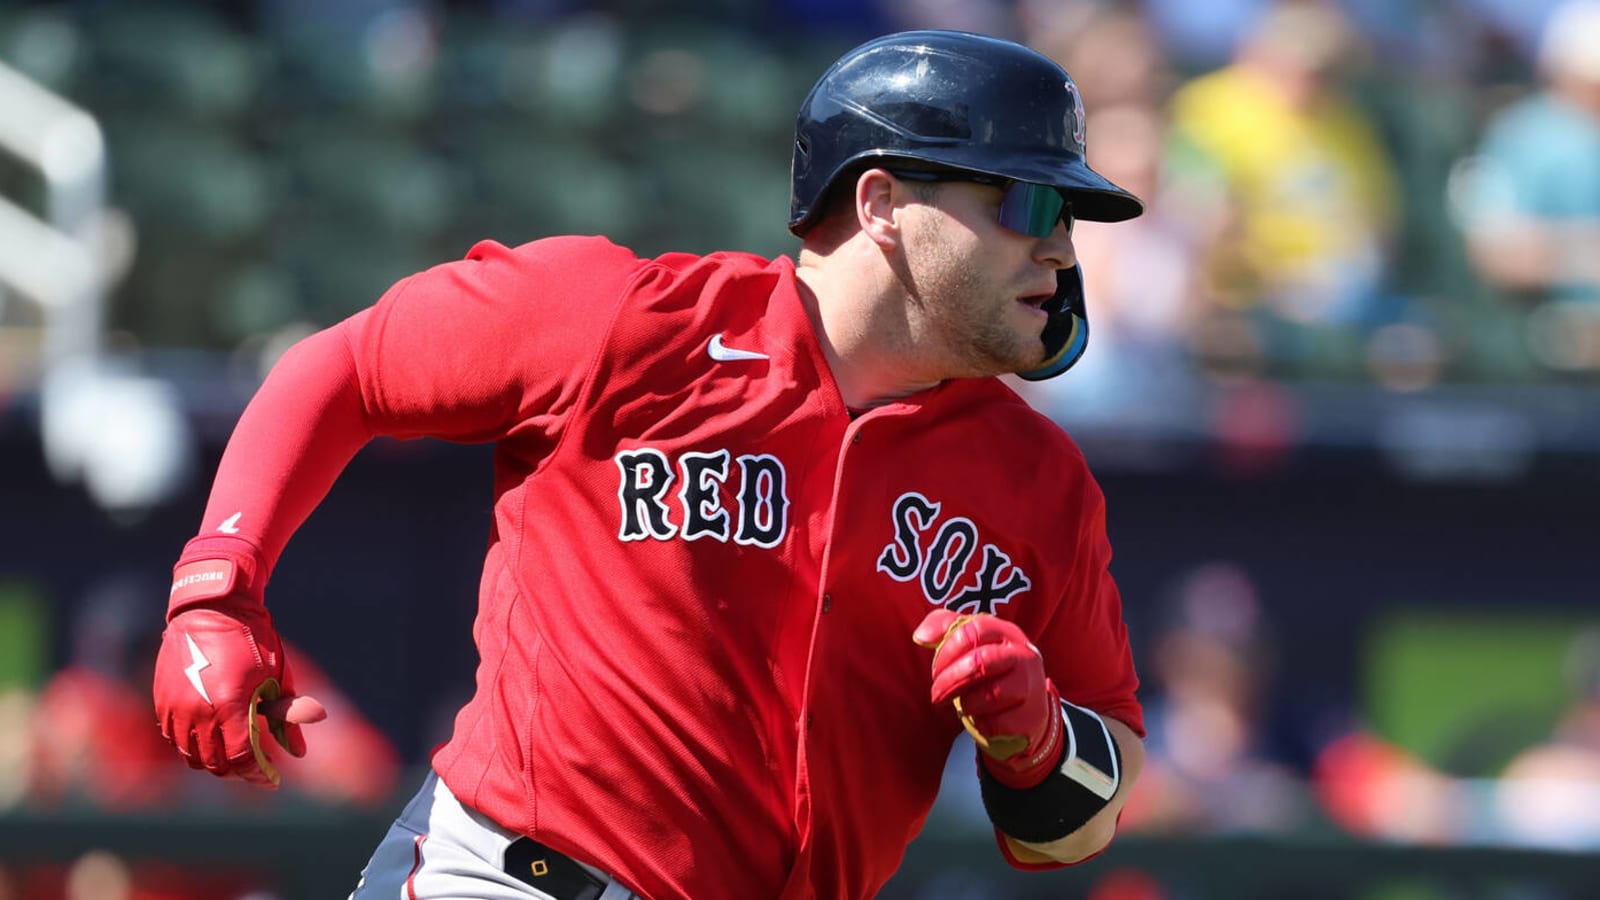 Red Sox Catcher Returns To Organization After Clearing Waivers To Bolster Depth